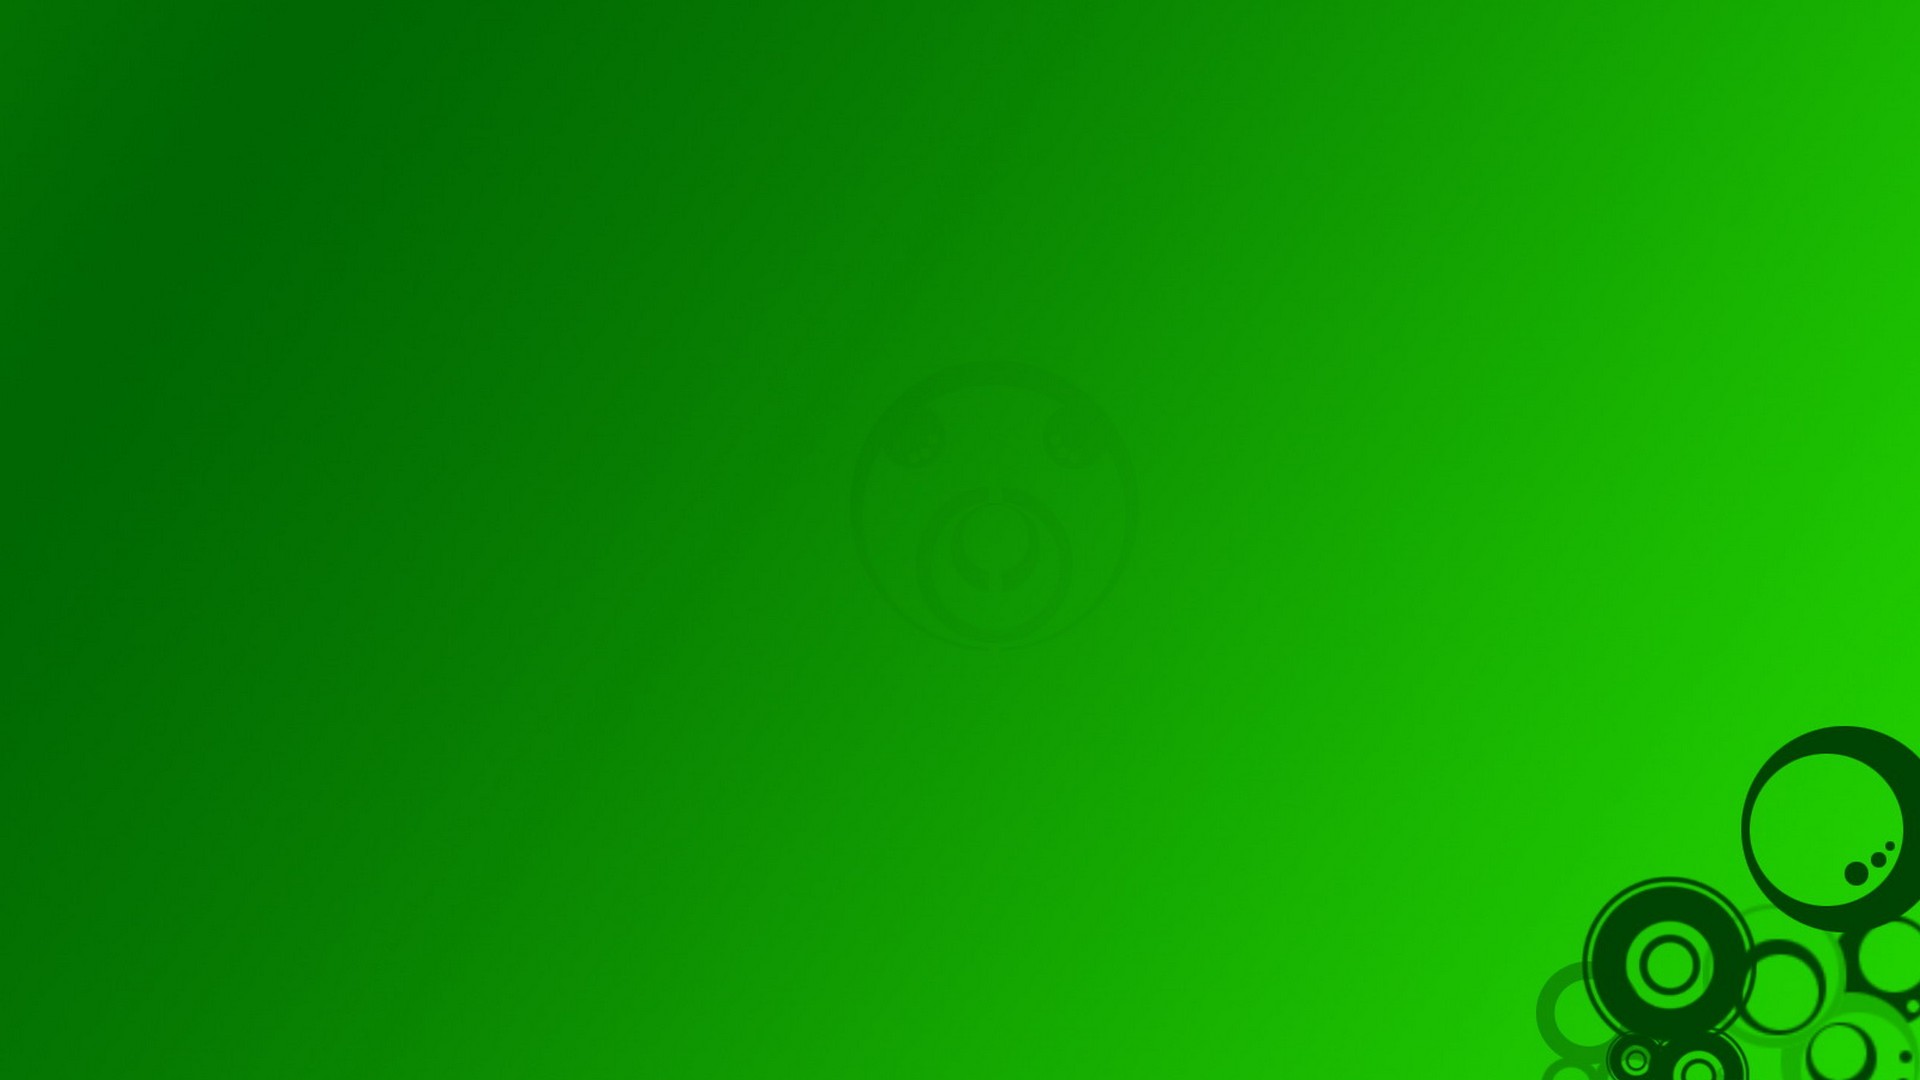 Green Desktop Backgrounds HD with resolution 1920X1080 pixel. You can use this wallpaper as background for your desktop Computer Screensavers, Android or iPhone smartphones